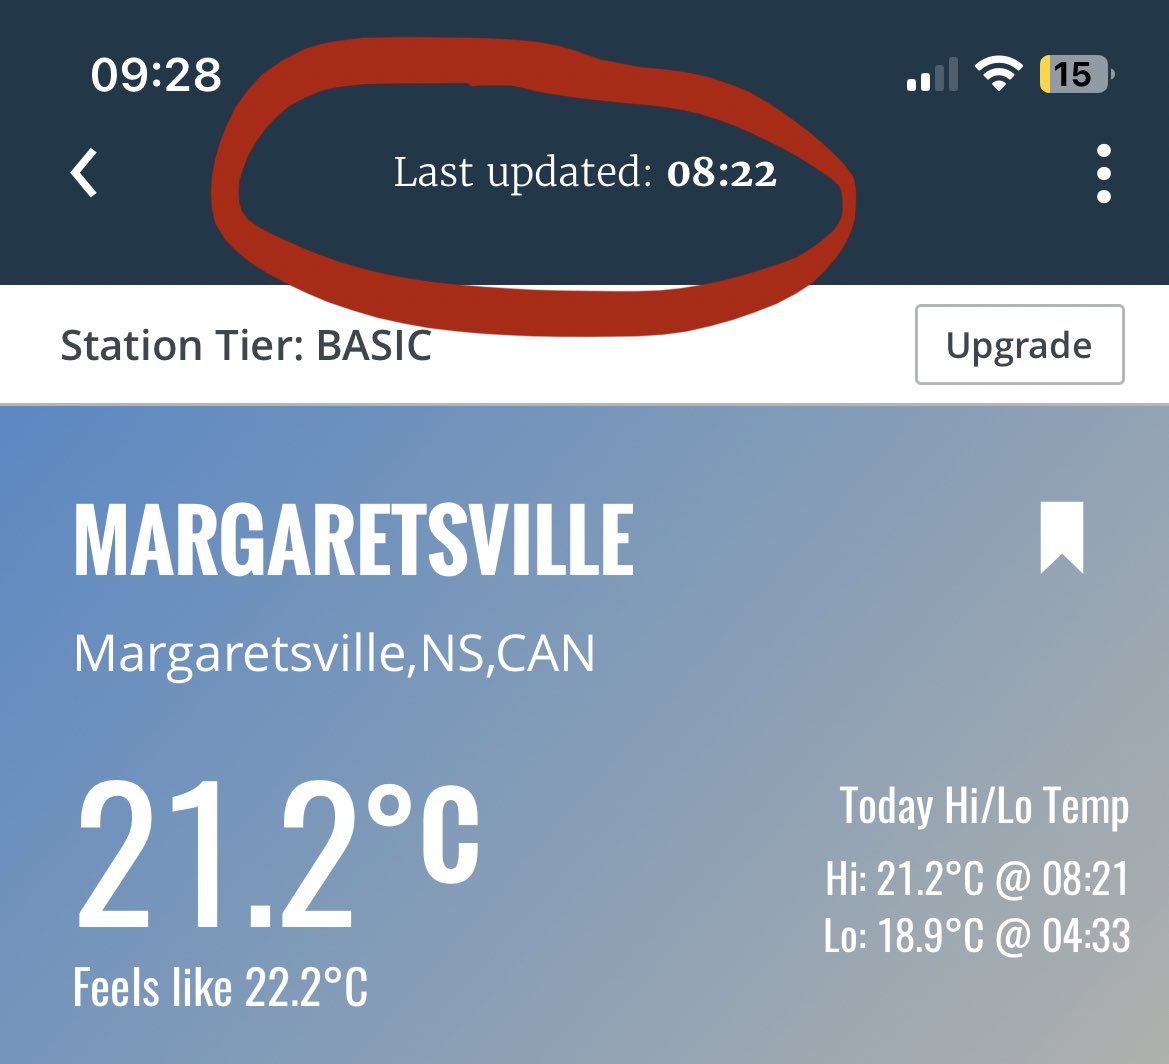 Does someone know if WeatherLink is down? Hasn’t updated in over an hour. I see that other stations that use a WLL have also not updated side 8:22 a.m. @davisinst #nswx #davisinstruments